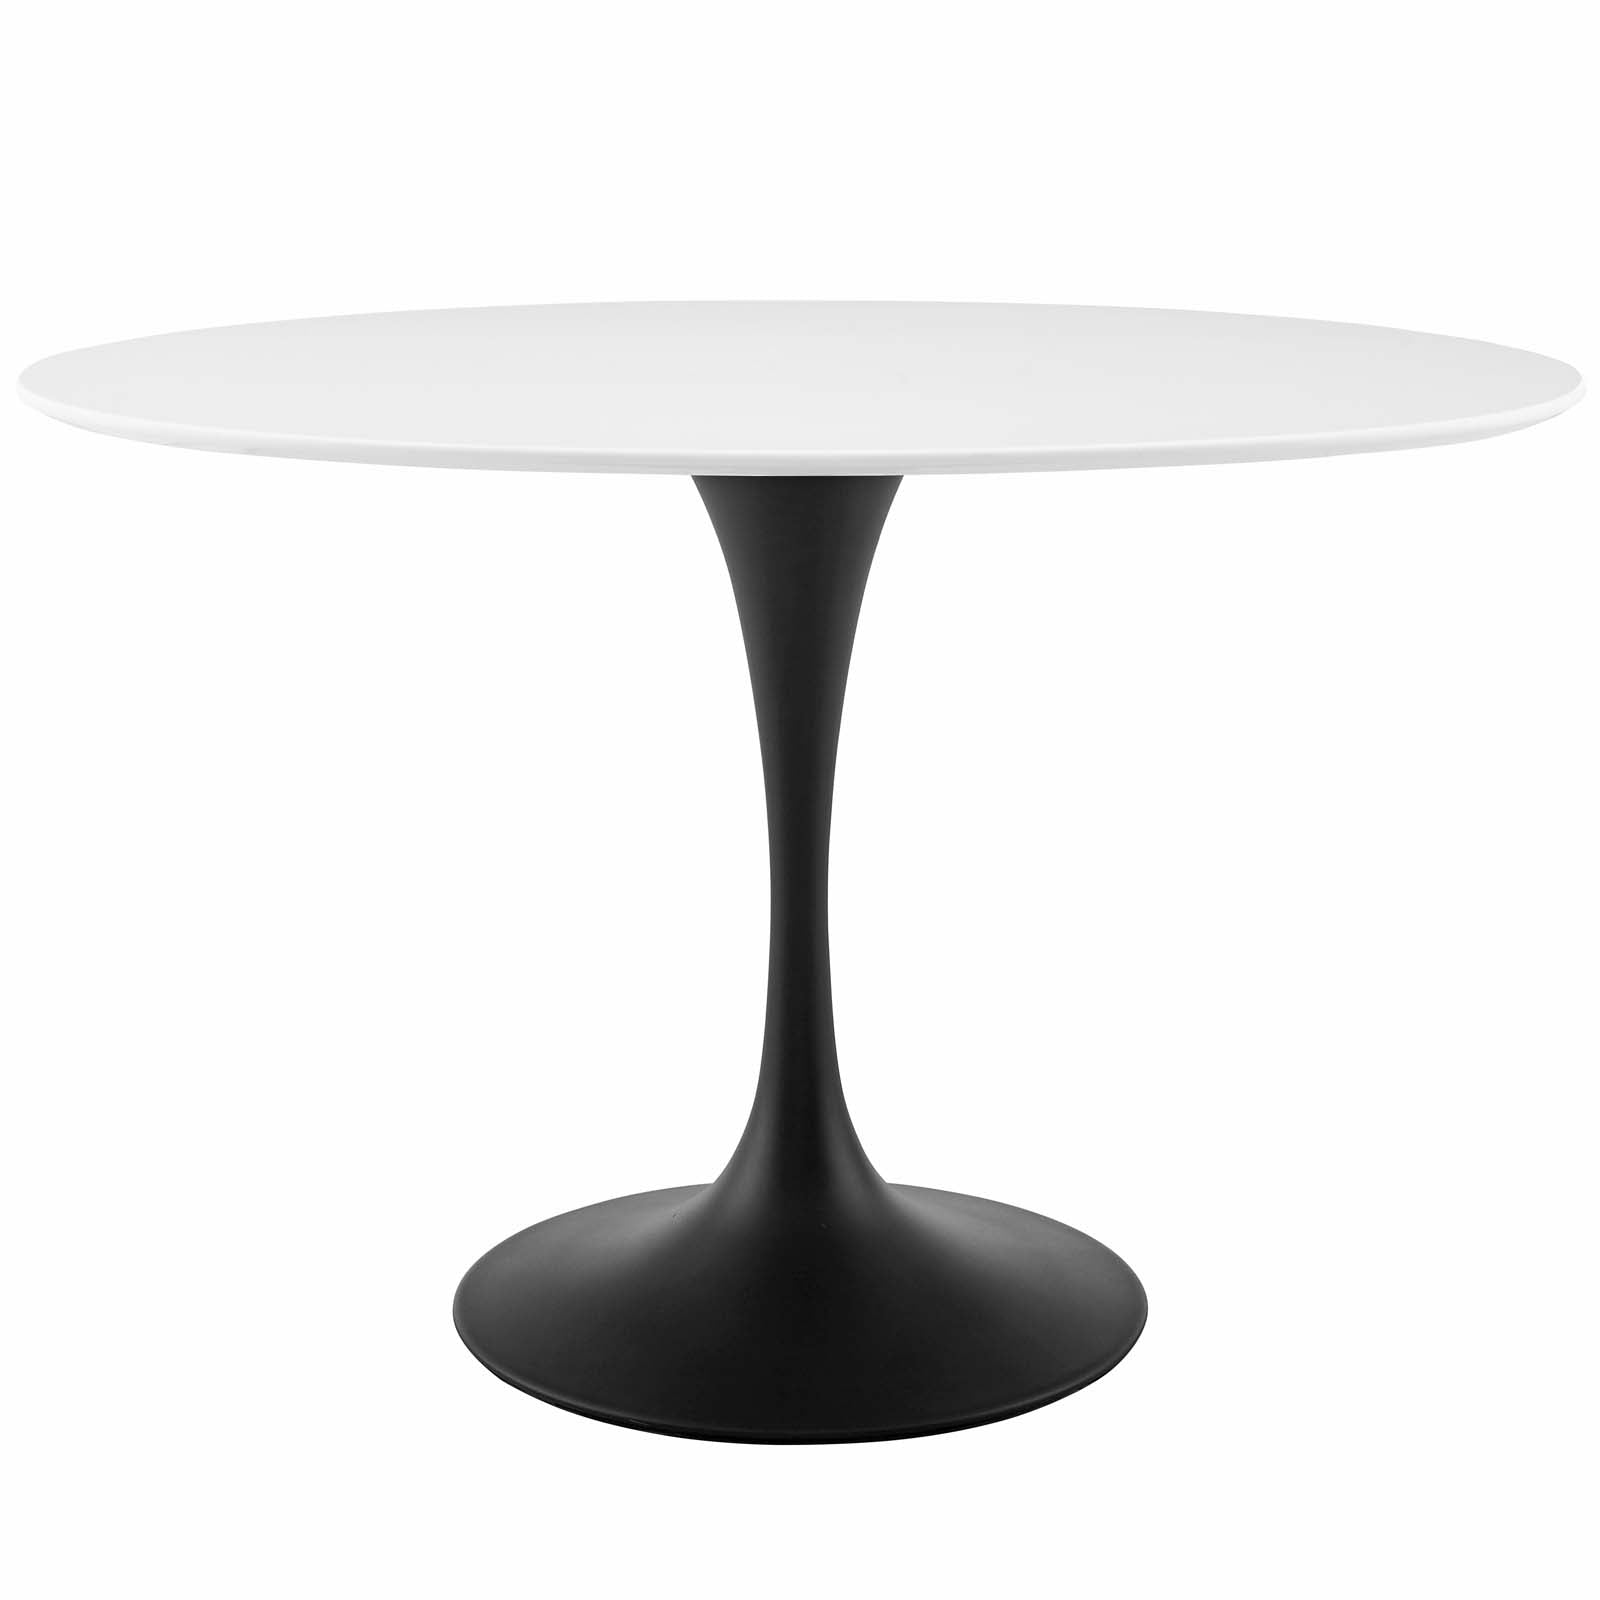 Lippa 48" Oval Wood Top Dining Table - East Shore Modern Home Furnishings